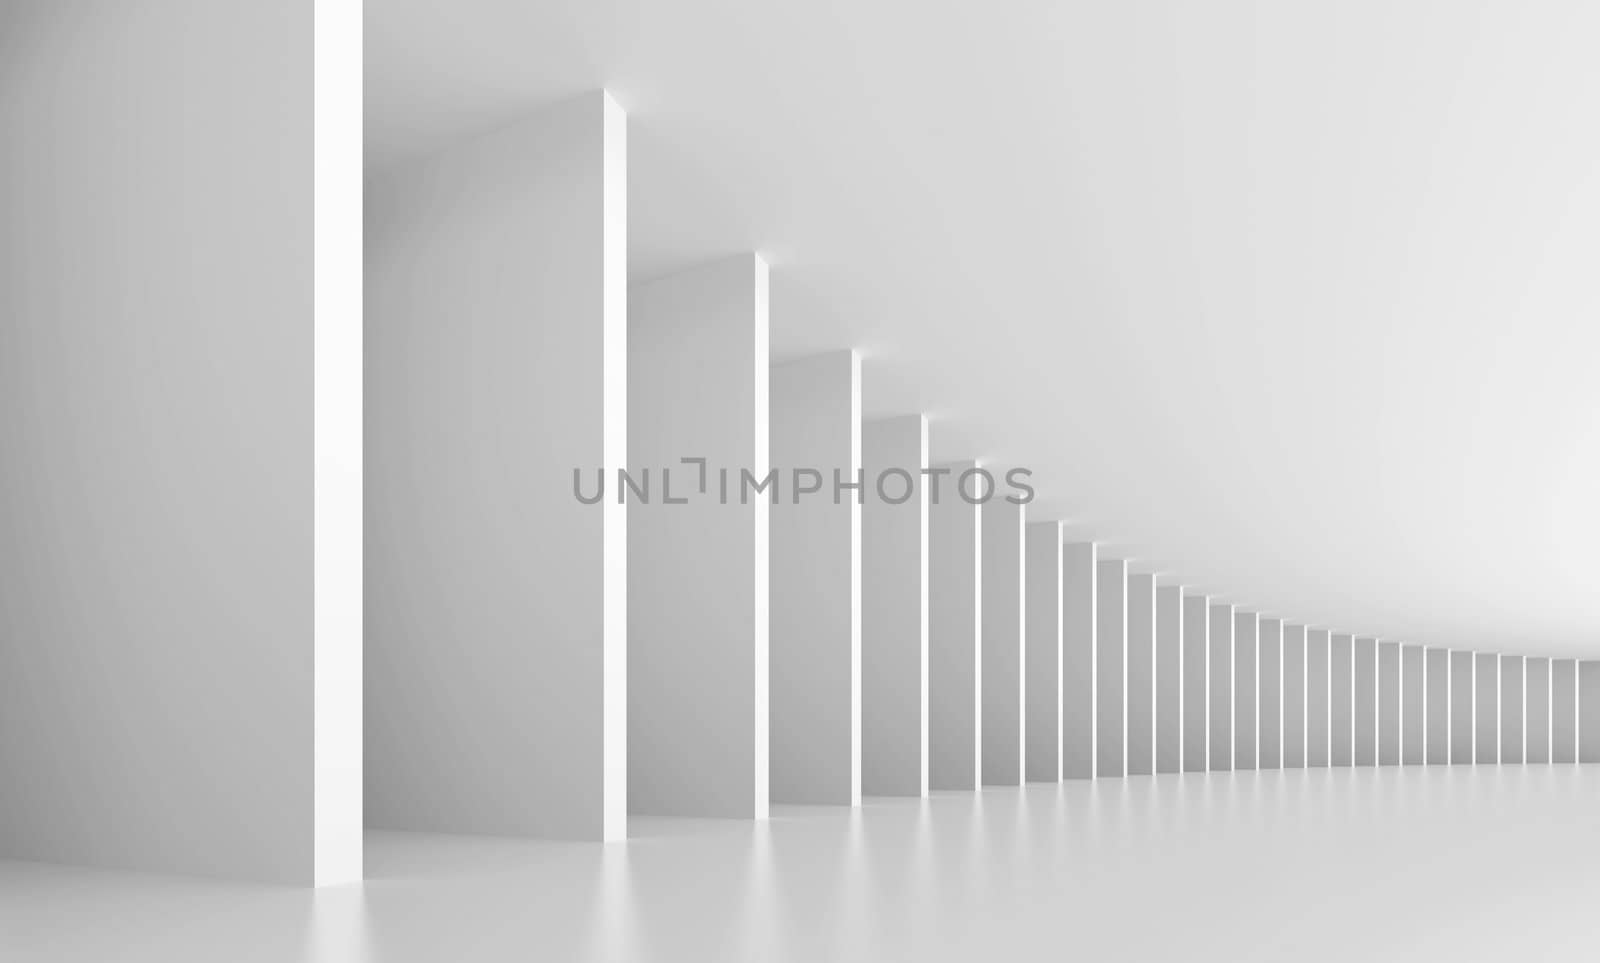 3d Illustration of White Abstract Interior Background